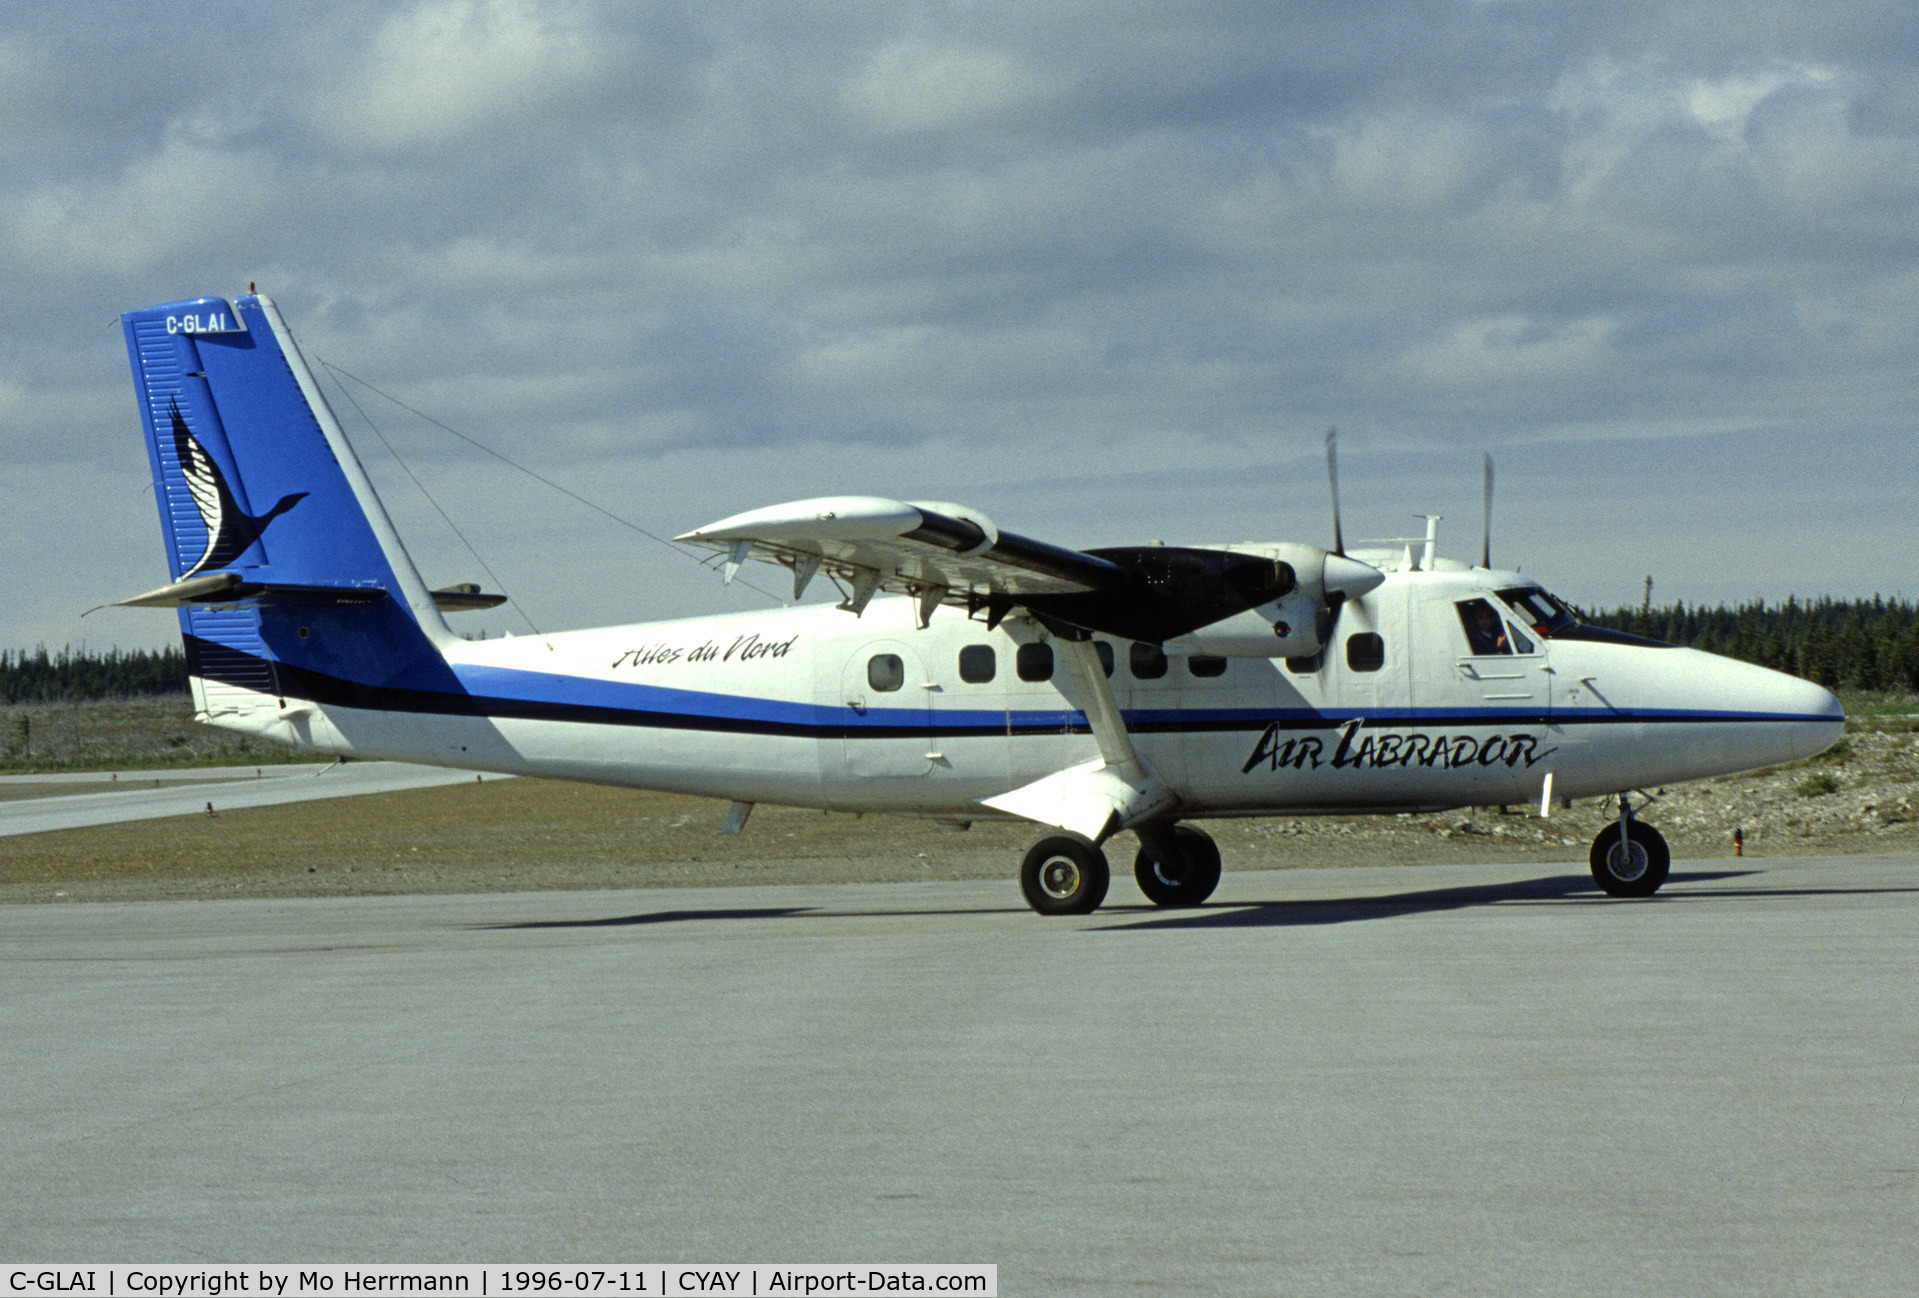 C-GLAI, 1971 De Havilland Canada DHC-6-300 Twin Otter C/N 296, taken at St. Anthony, NFLD